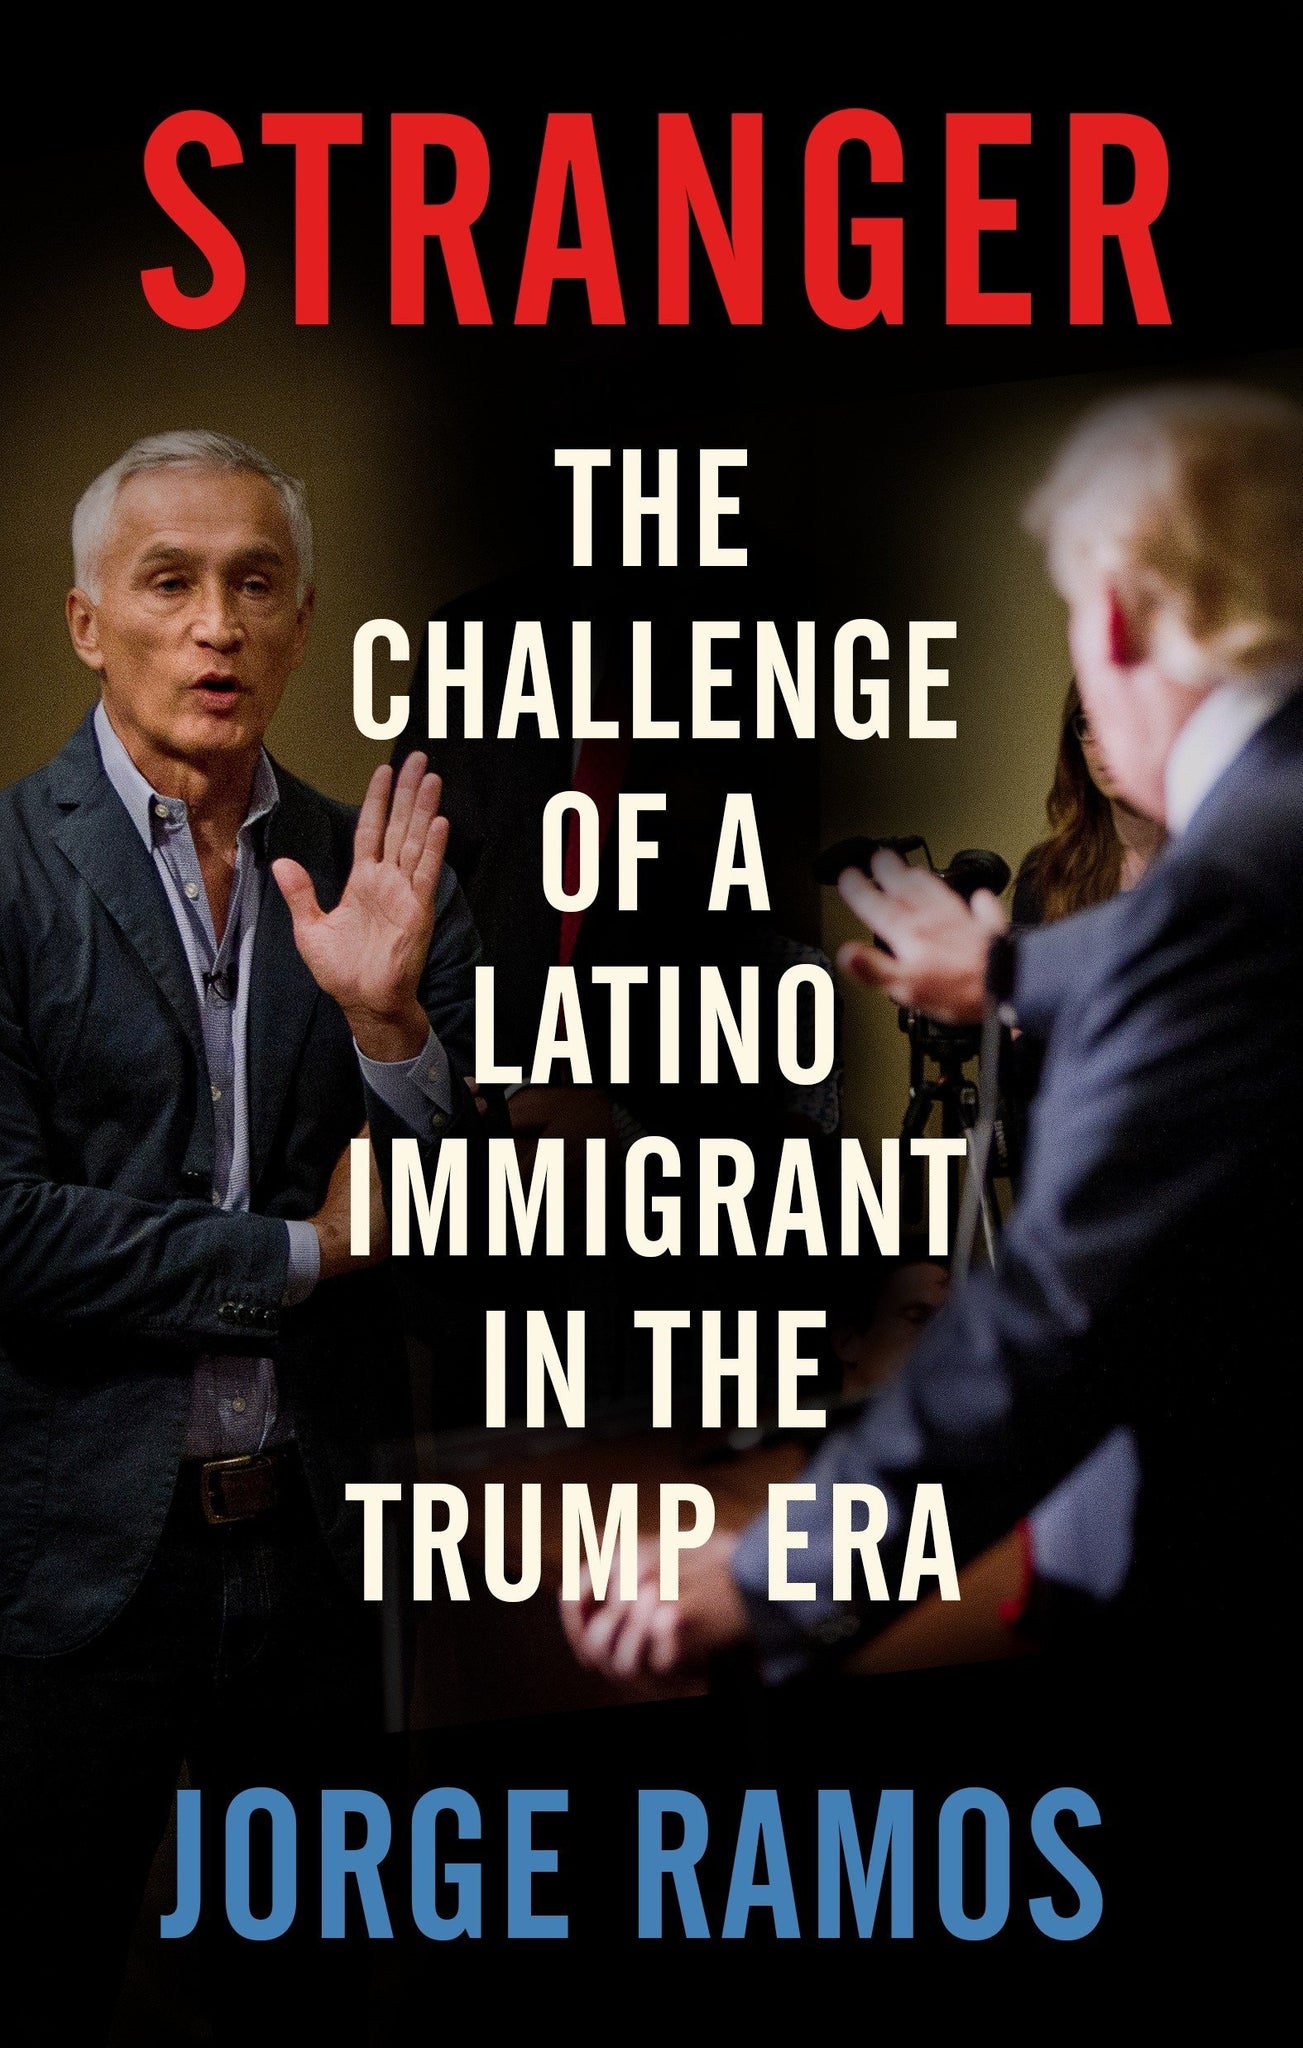 Stranger: The Challenge of a Latino Immigrant in the Trump Era by Jorge Ramos